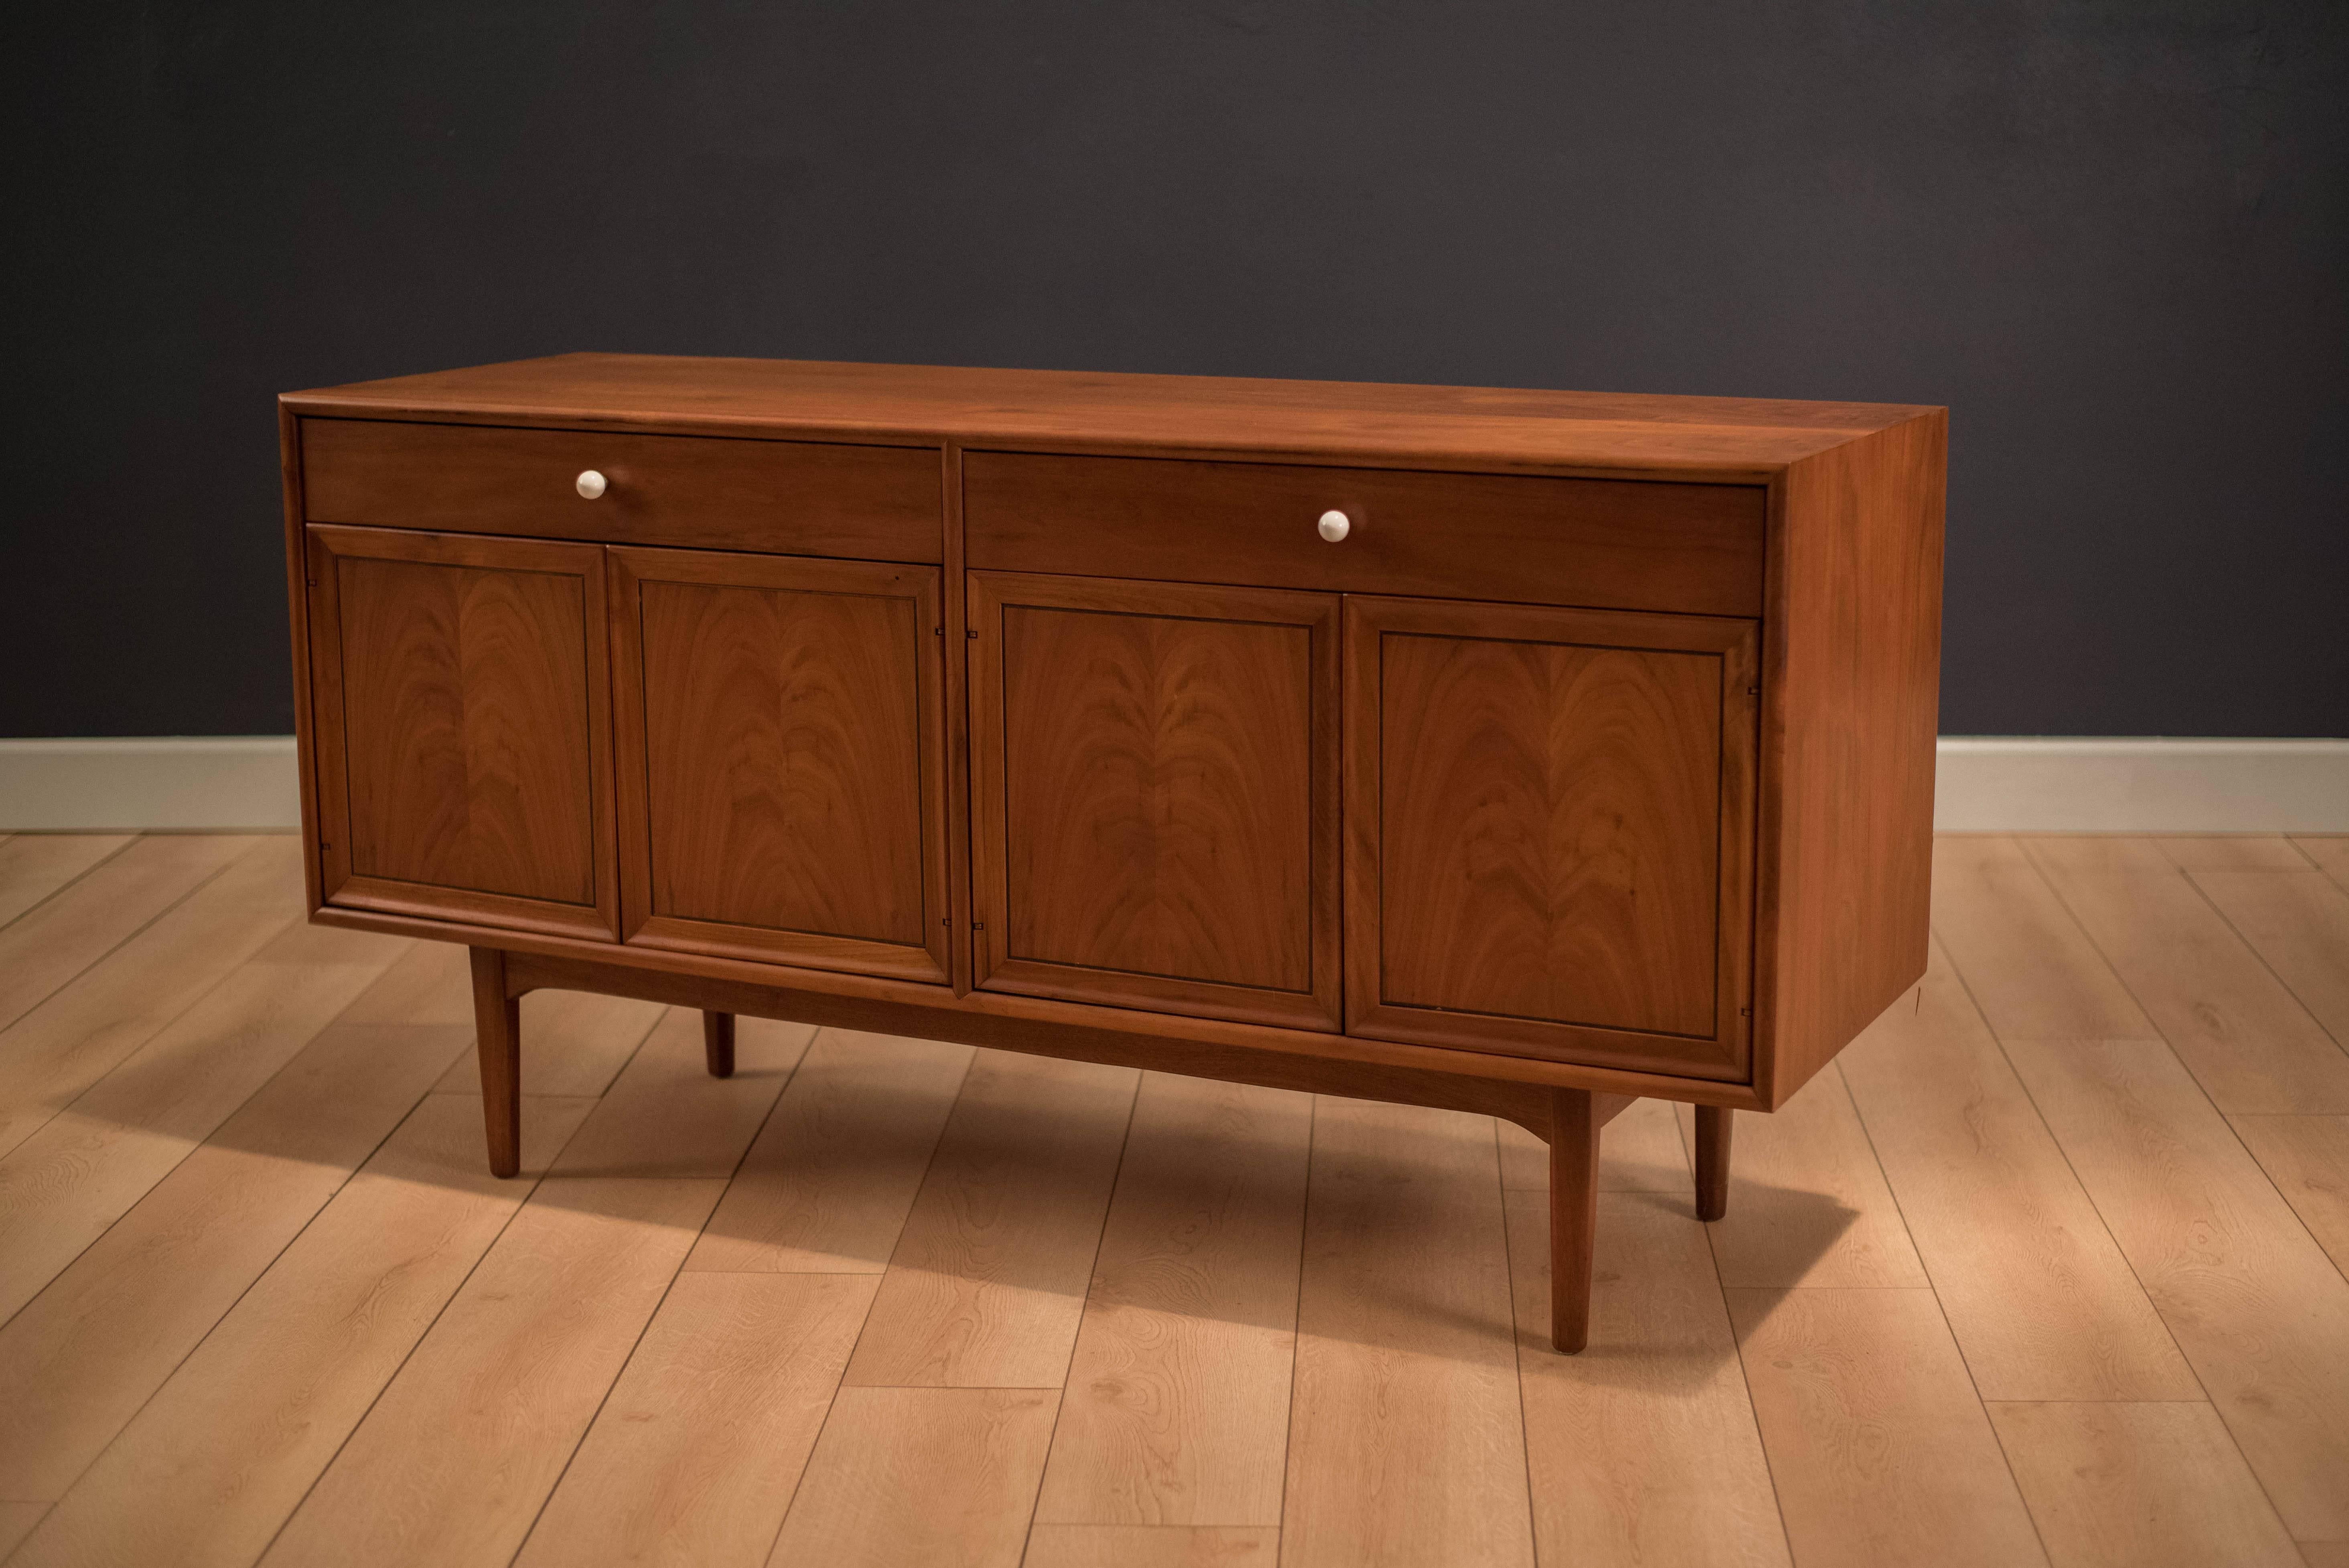 Mid Century Drexel Declaration Buffet Credenza by Kipp Stewart and Stewart McDougall. This piece features bookmatched black walnut grains highlighted by their signature white porcelain pulls. Equipped with two drawers and adjustable open shelving.